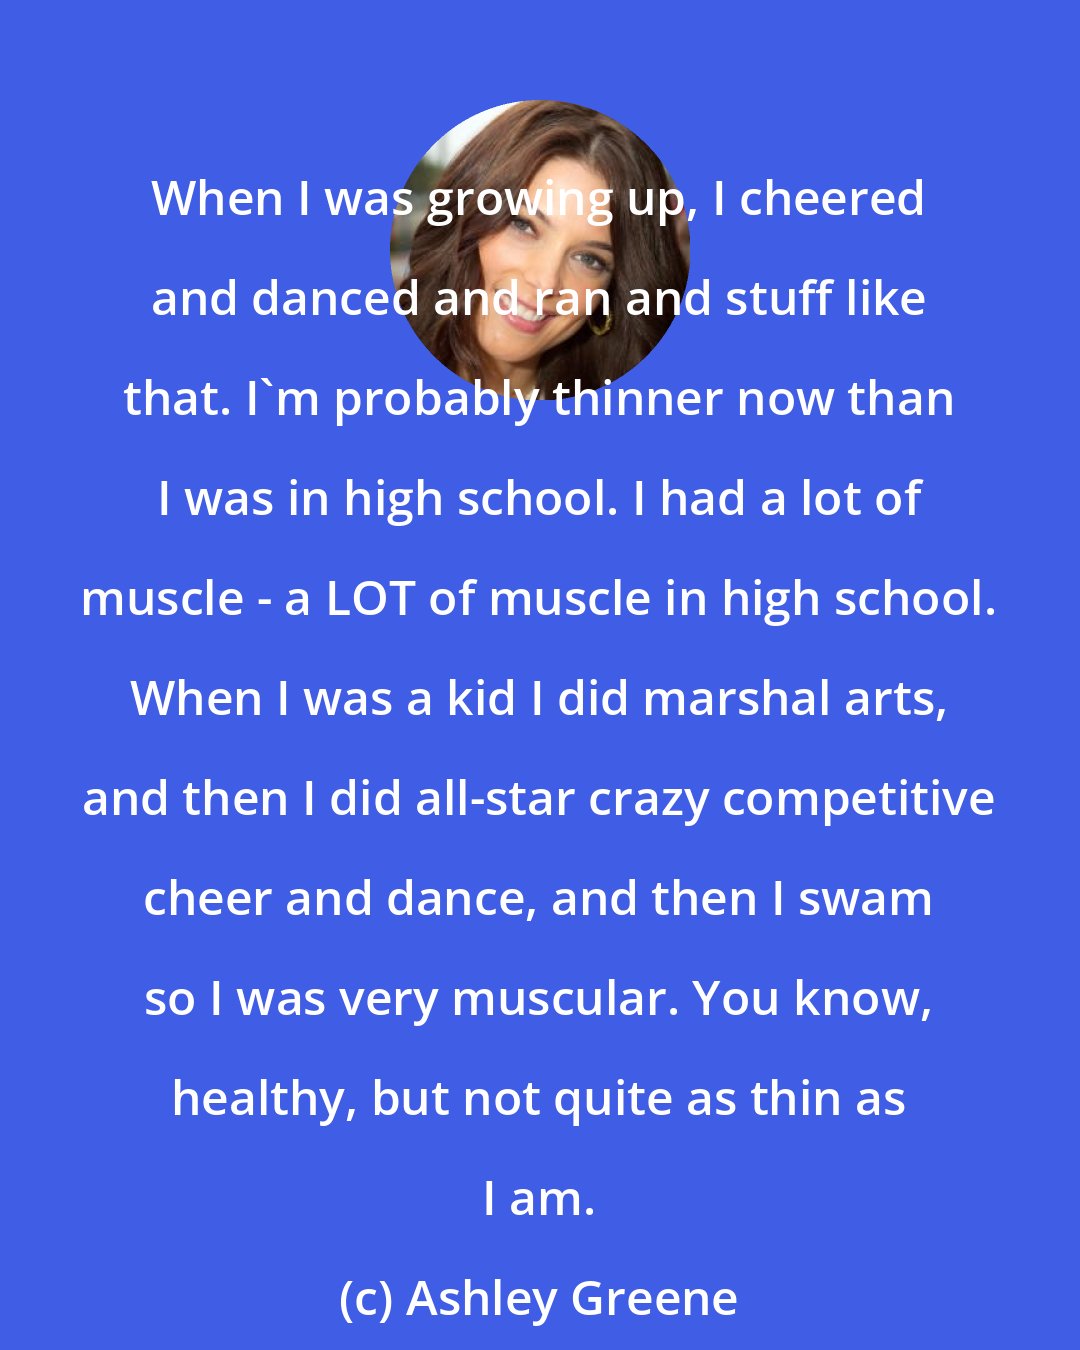 Ashley Greene: When I was growing up, I cheered and danced and ran and stuff like that. I'm probably thinner now than I was in high school. I had a lot of muscle - a LOT of muscle in high school. When I was a kid I did marshal arts, and then I did all-star crazy competitive cheer and dance, and then I swam so I was very muscular. You know, healthy, but not quite as thin as I am.